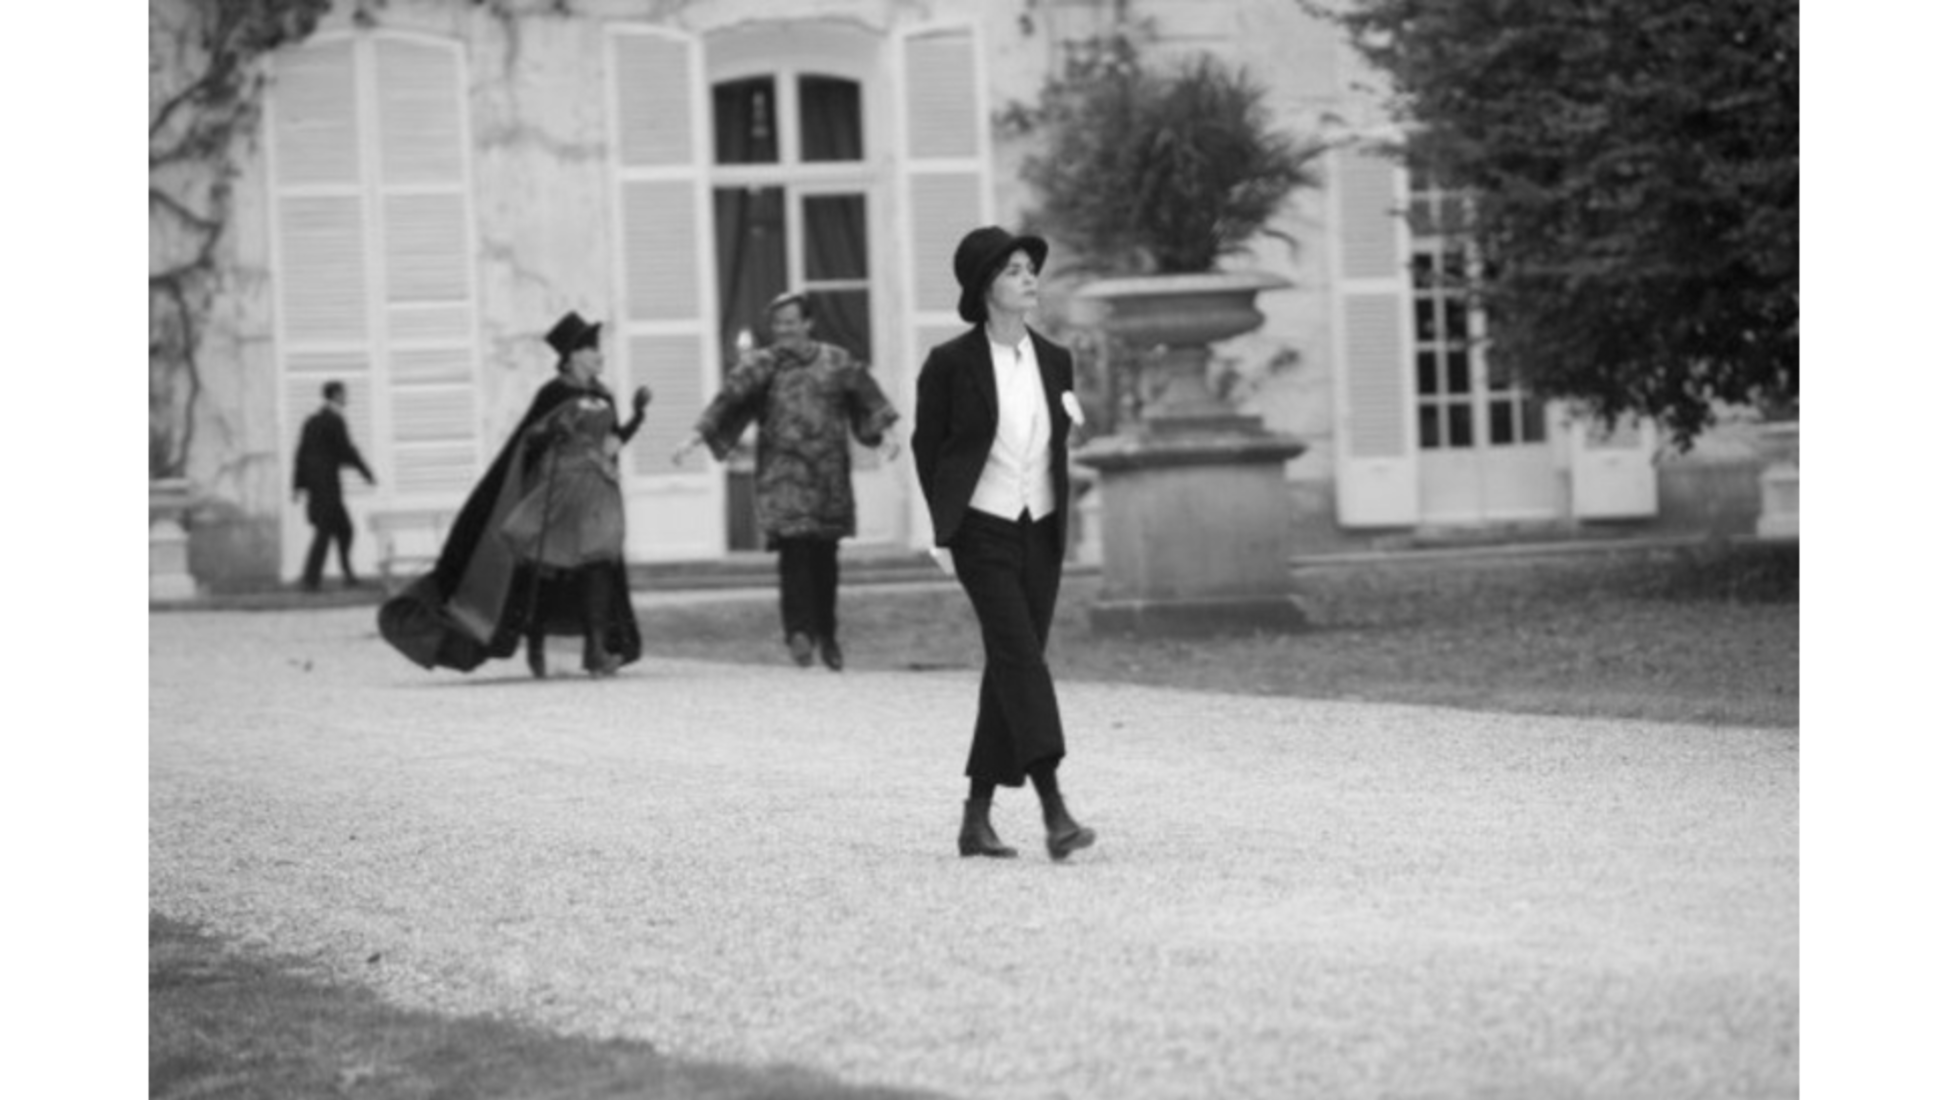 My French Country Home Magazine » 3 Ways Coco Chanel Changed